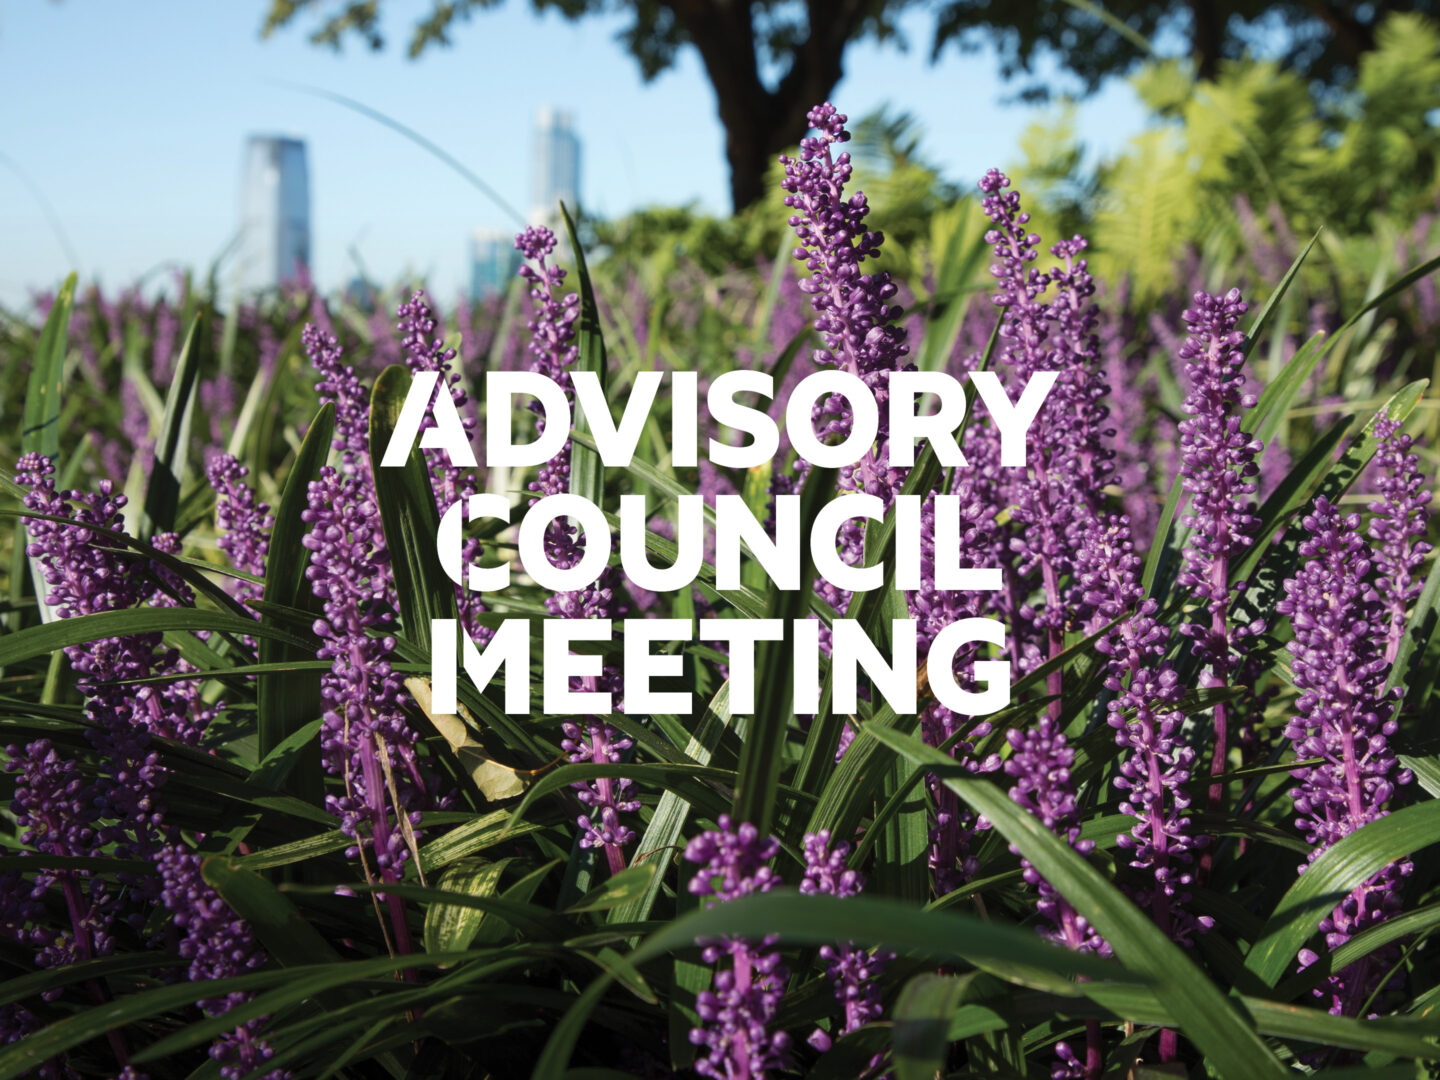 Lavender flowers with overlaid text reading "Advisory Council Meeting"